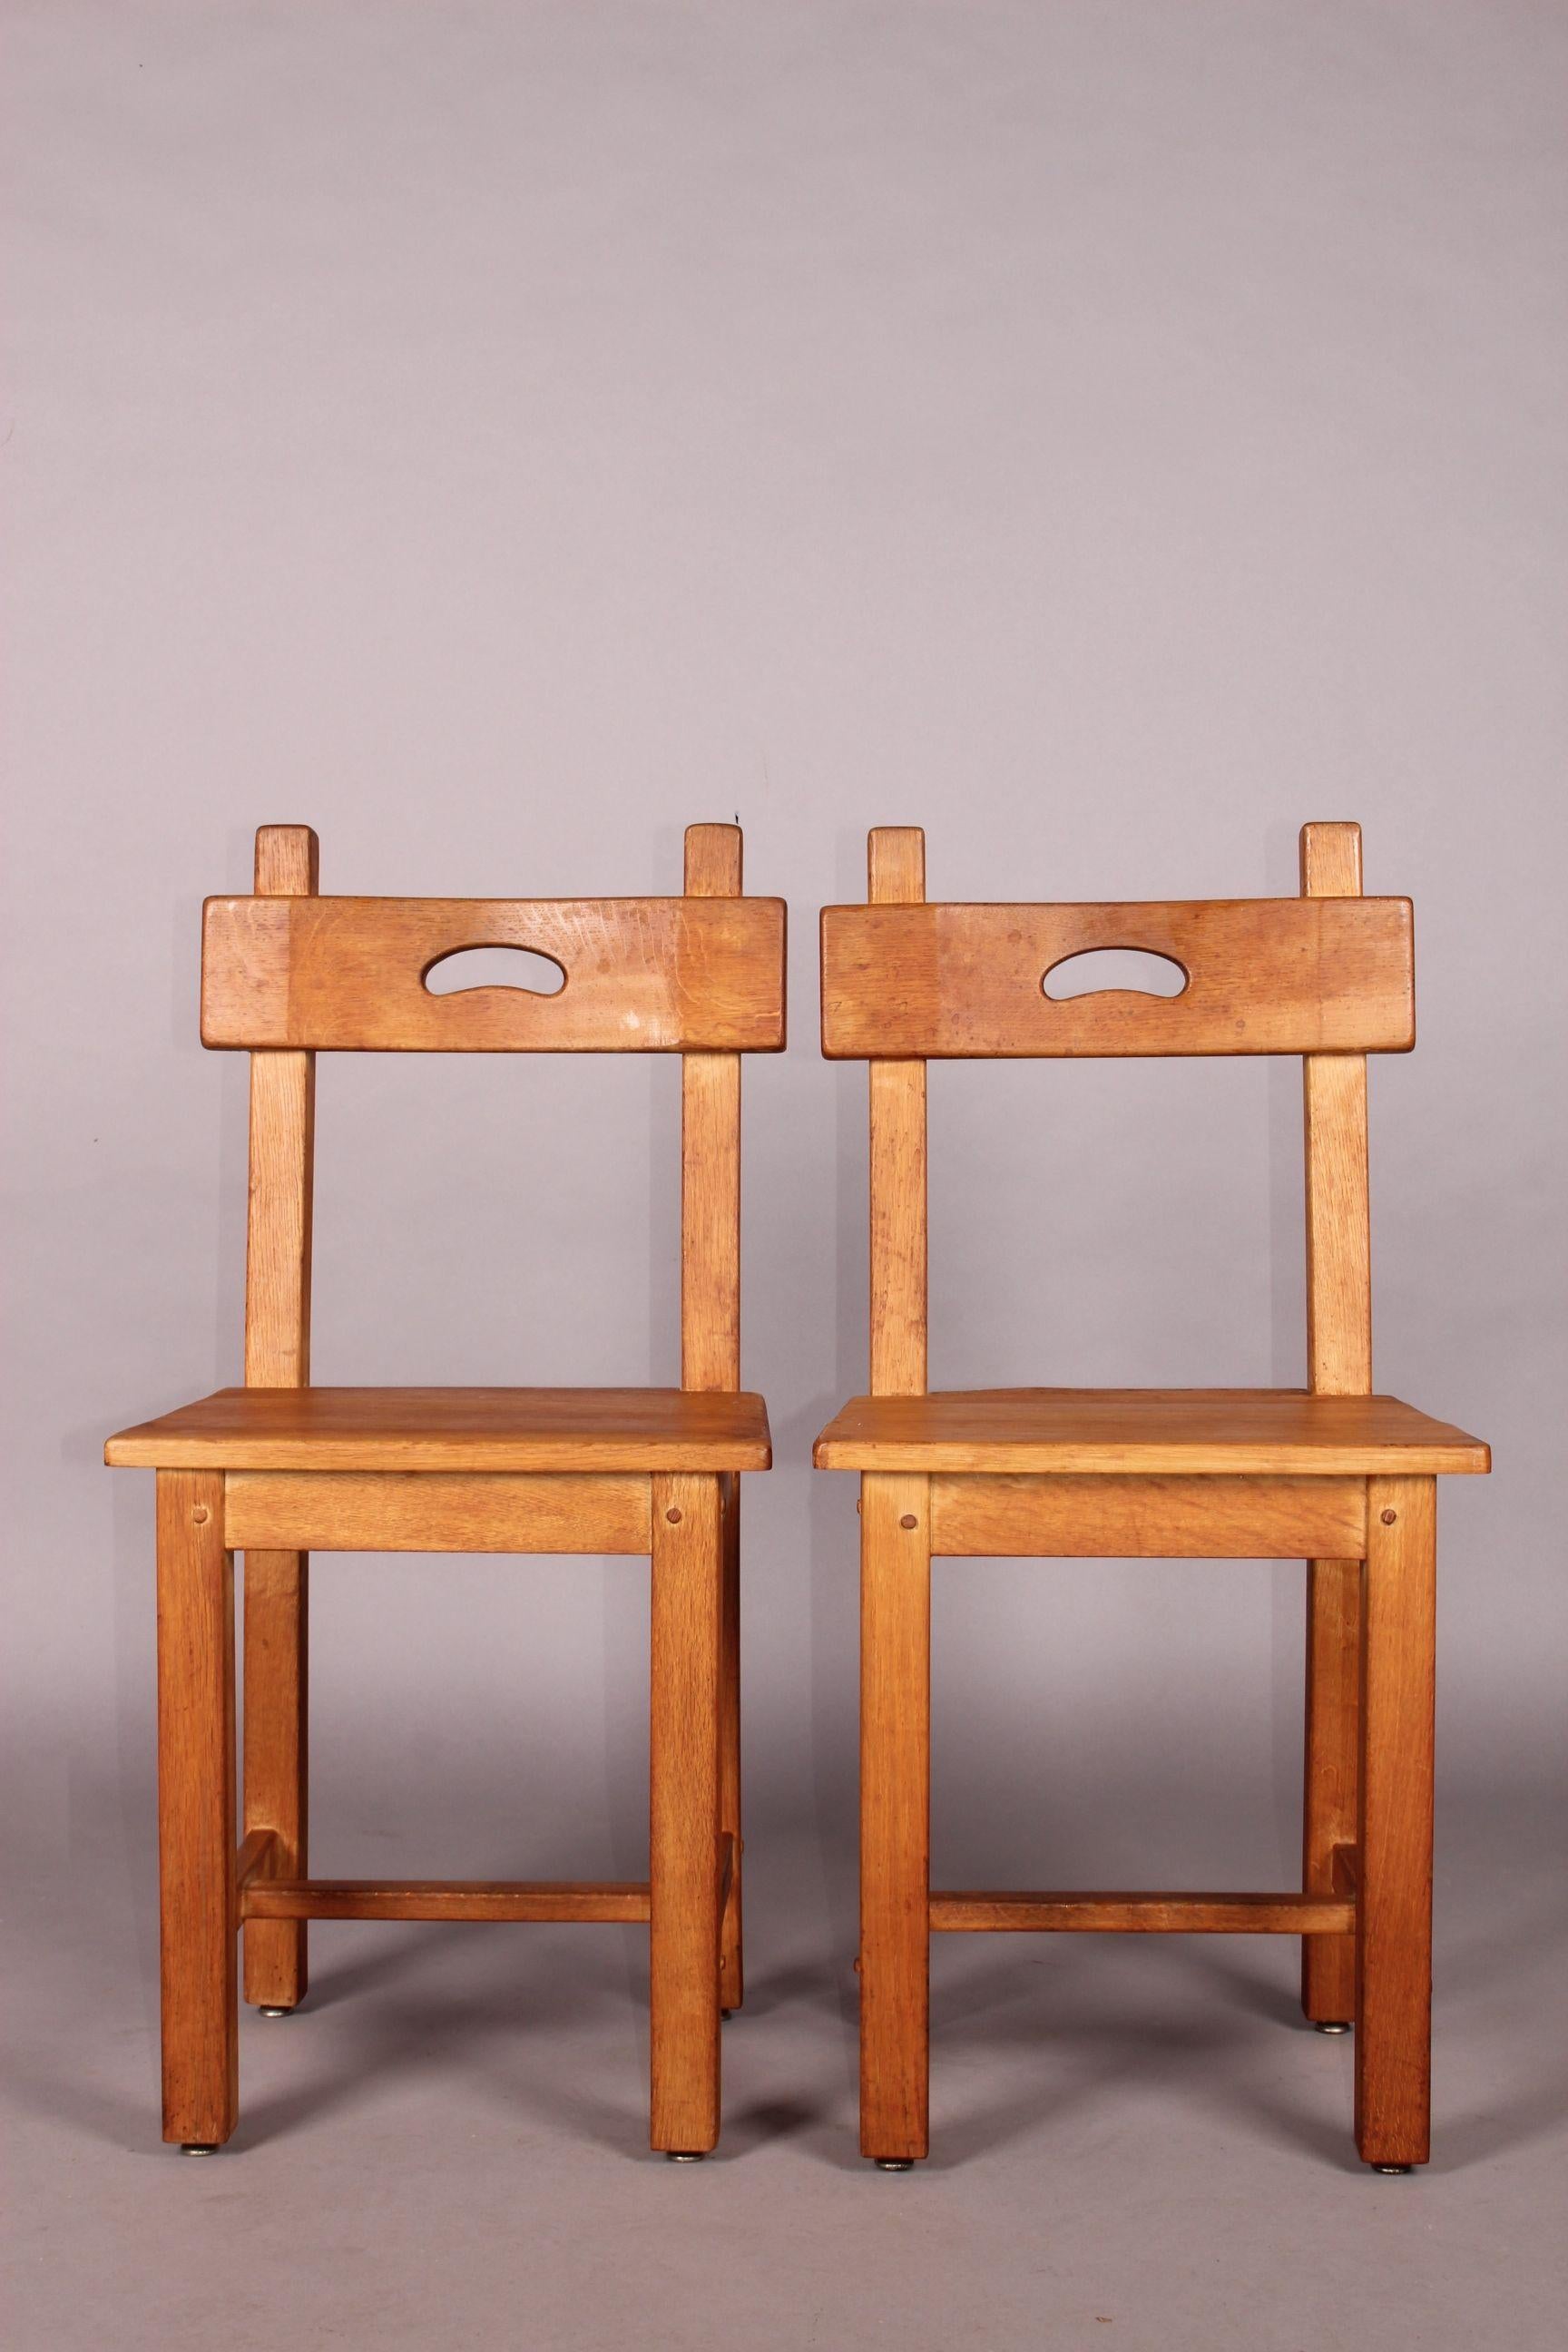 European Alexandre Noll Style Pair of Chairs